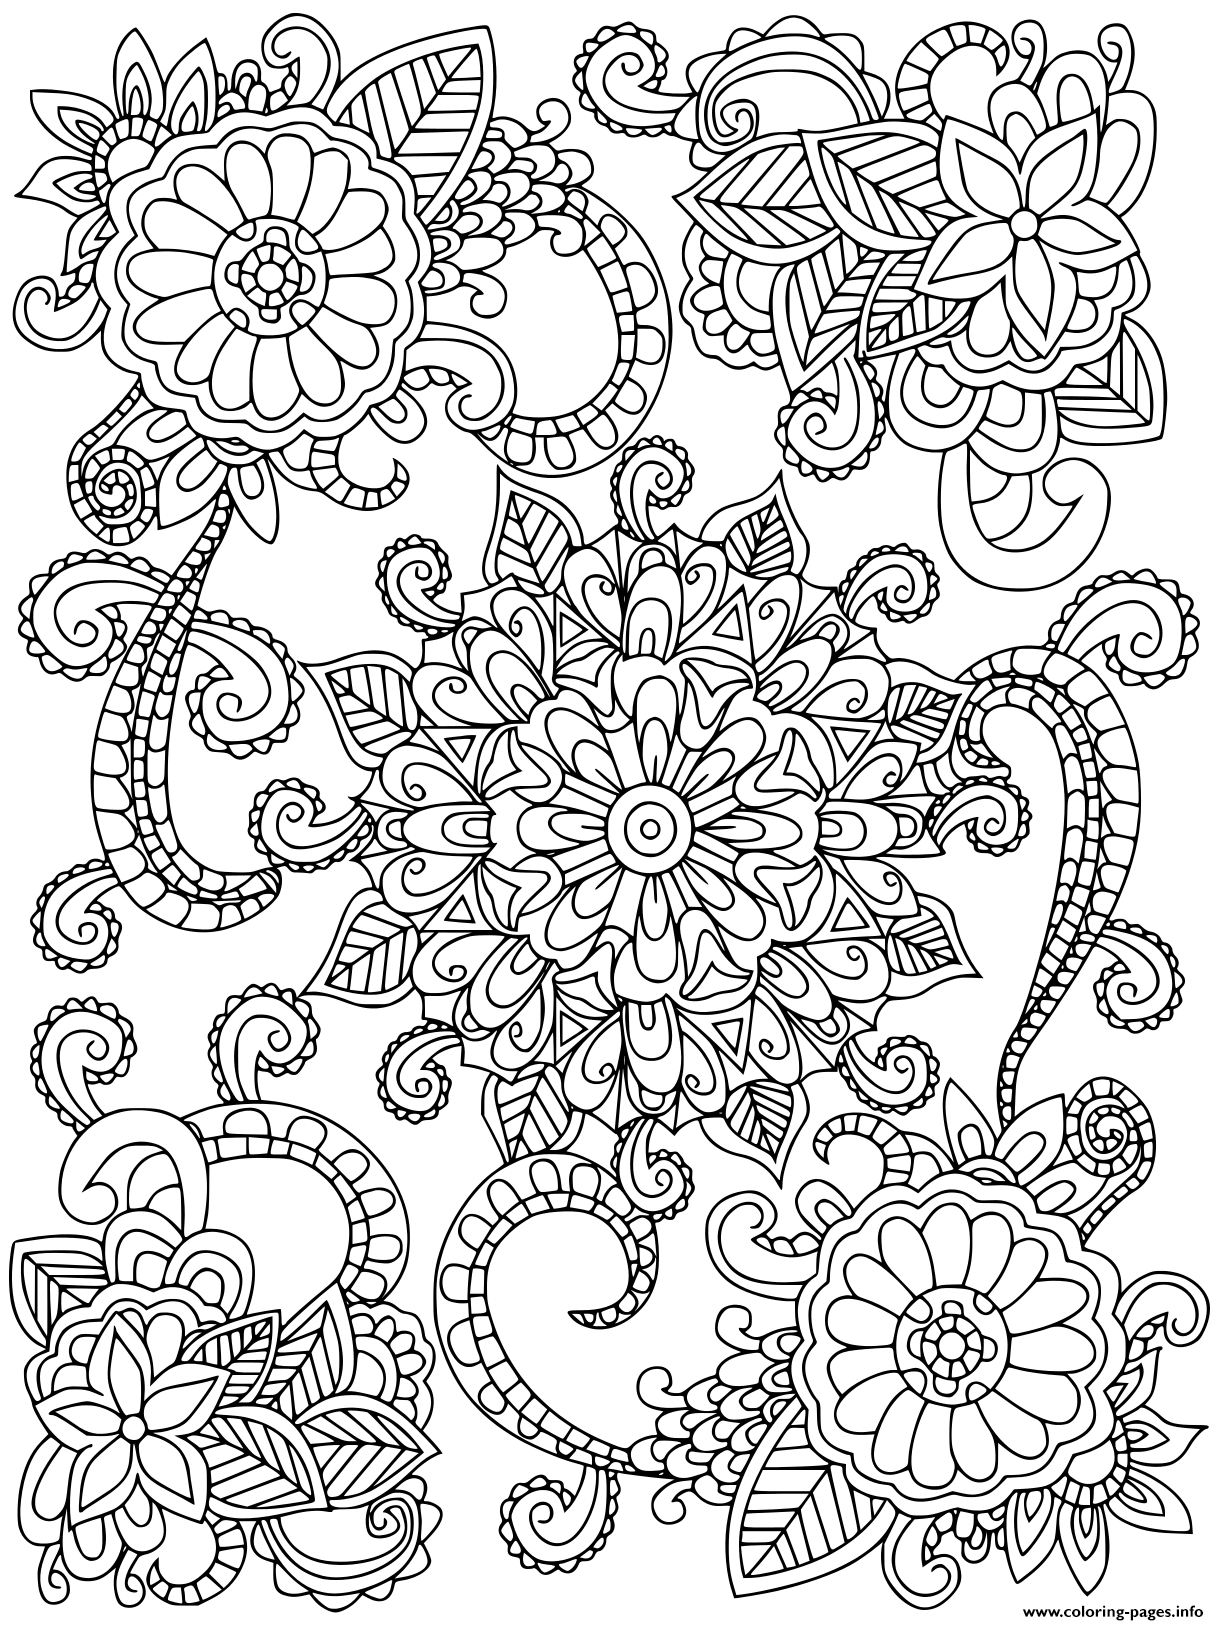 Mandala Flowers For Adults Coloring Pages Printable